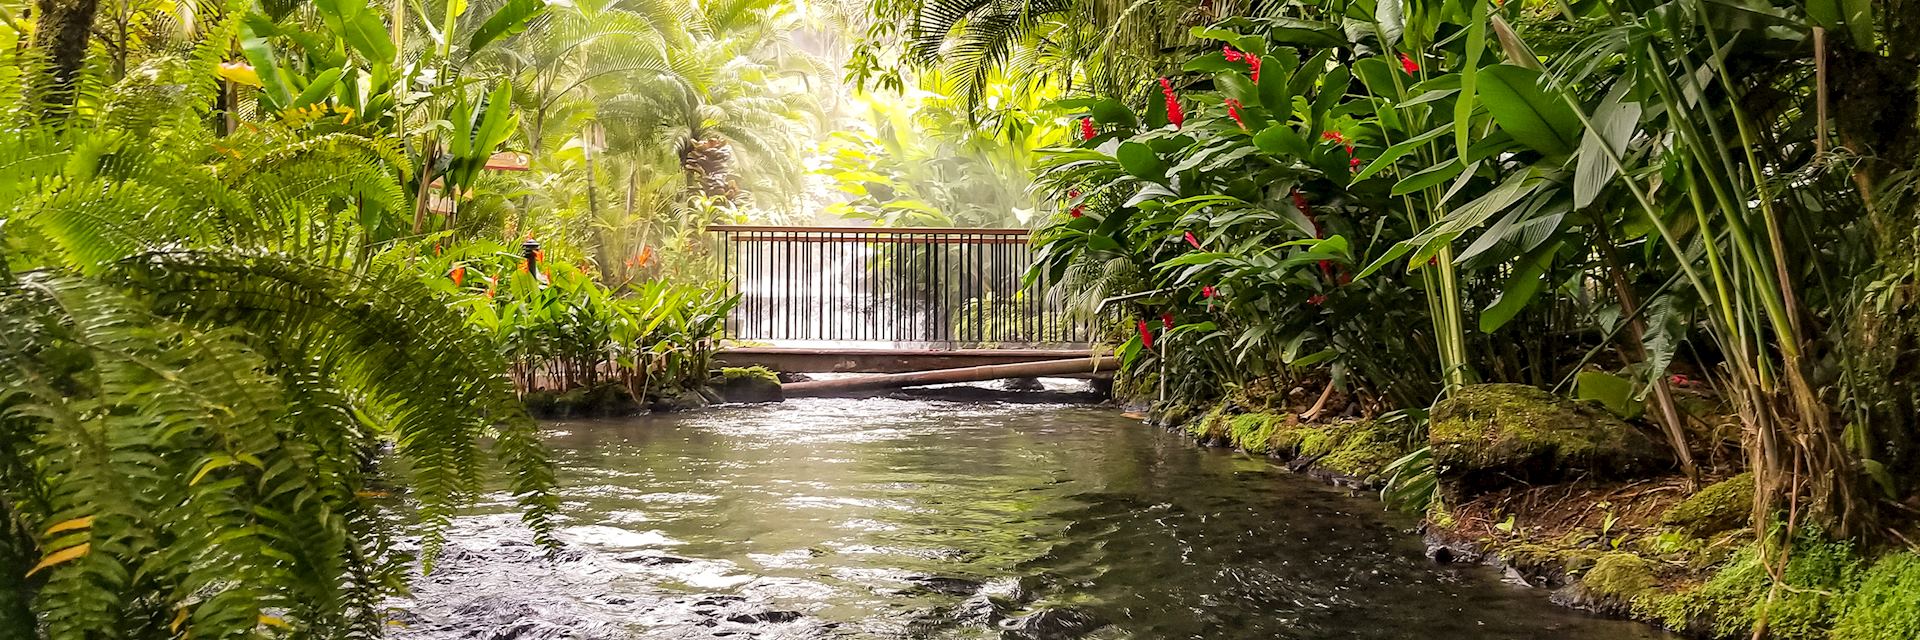 Tabacon Hot Springs River at Arenal Volcano